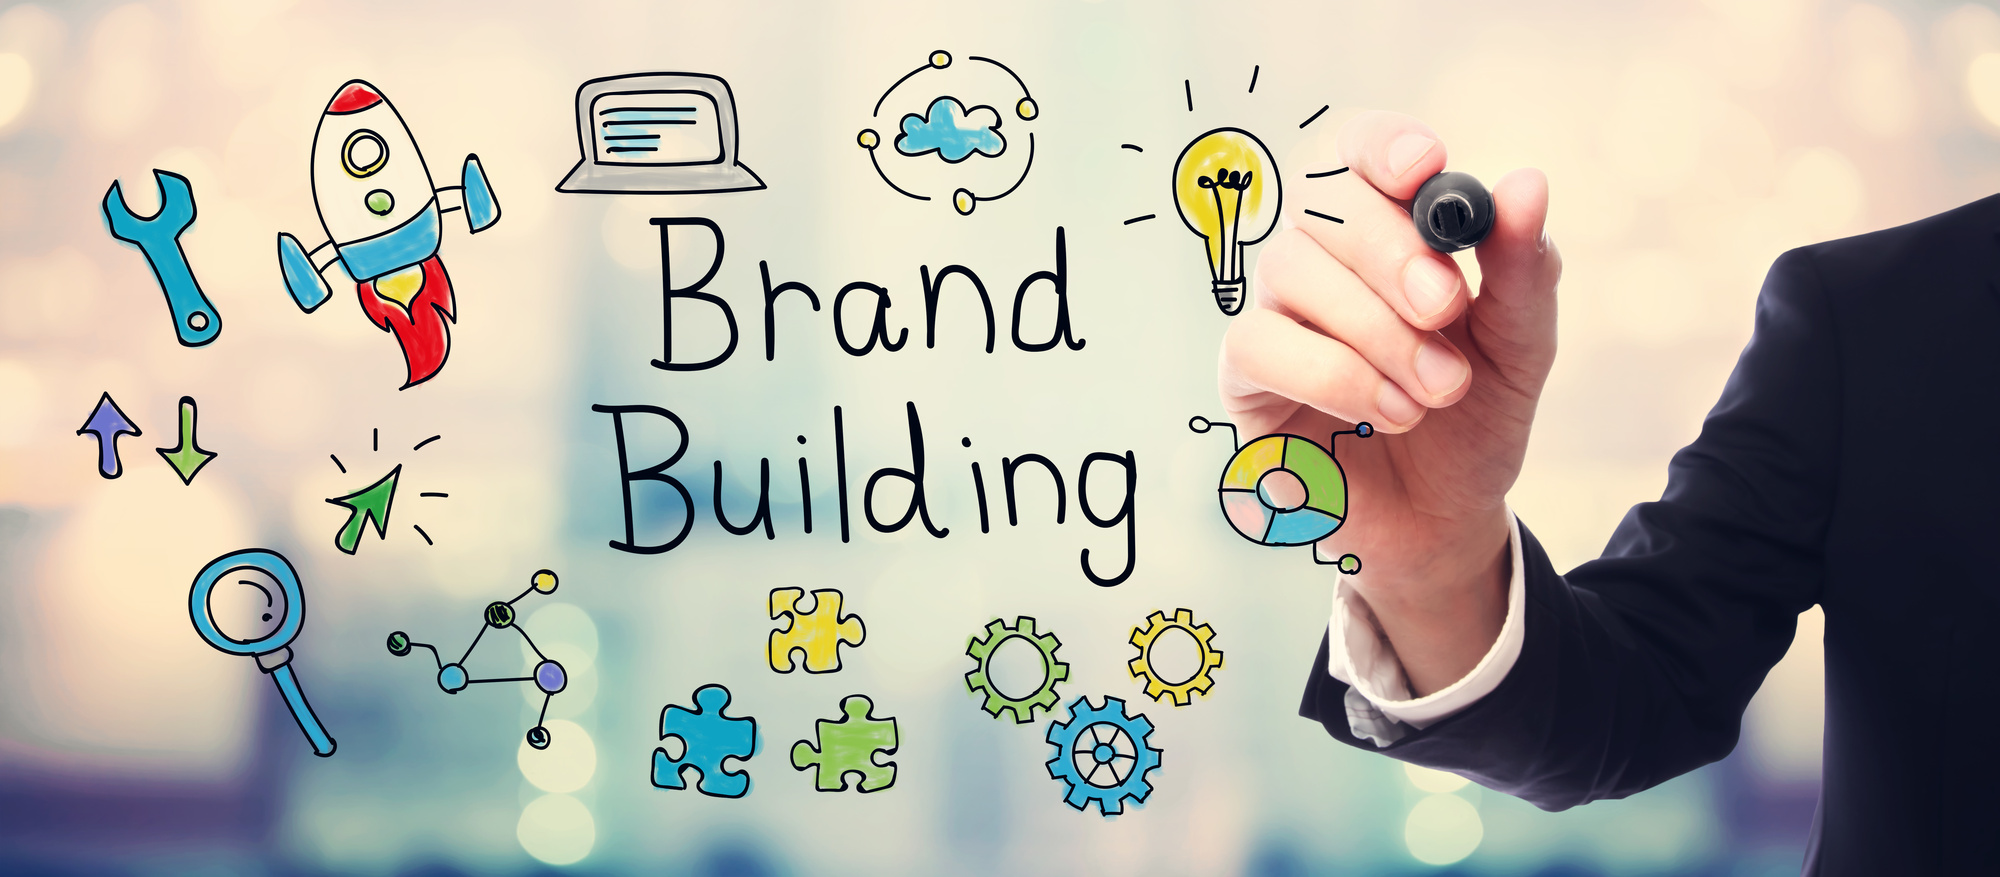 7 Key Benefits of Branding Every Business Owner Should Know About